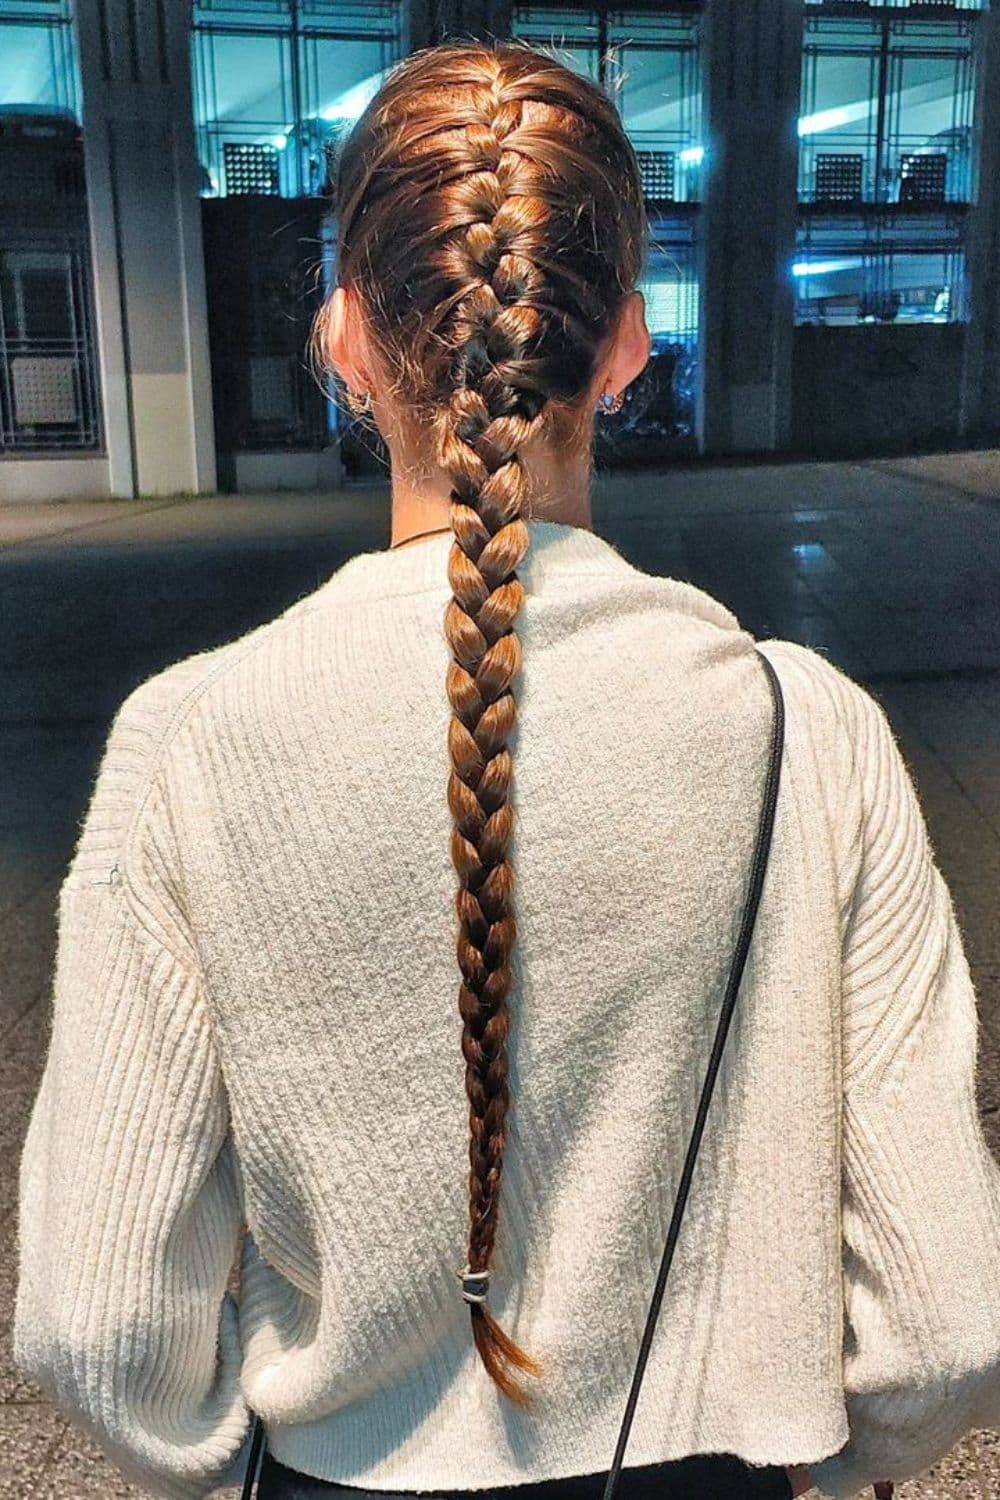 A woman with brown French braids ponytail.